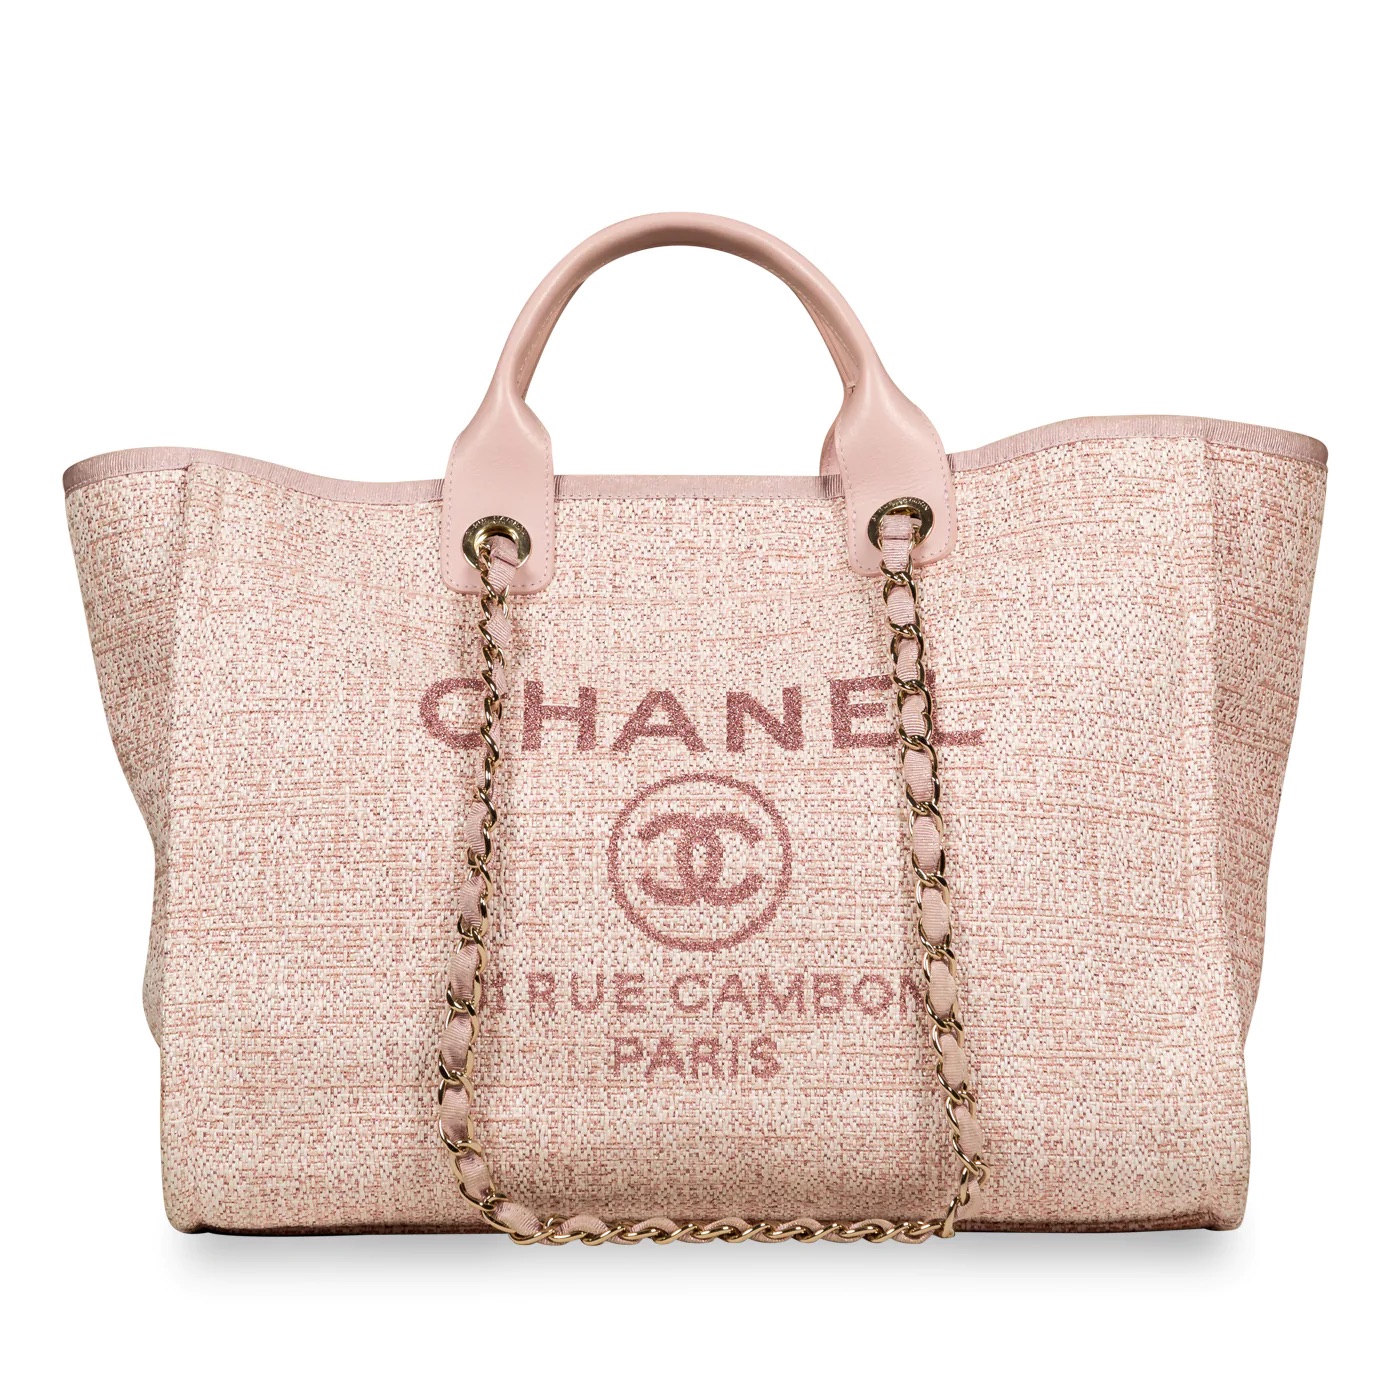 The Chanel Deauville Tote, An Ode to the French Seaside